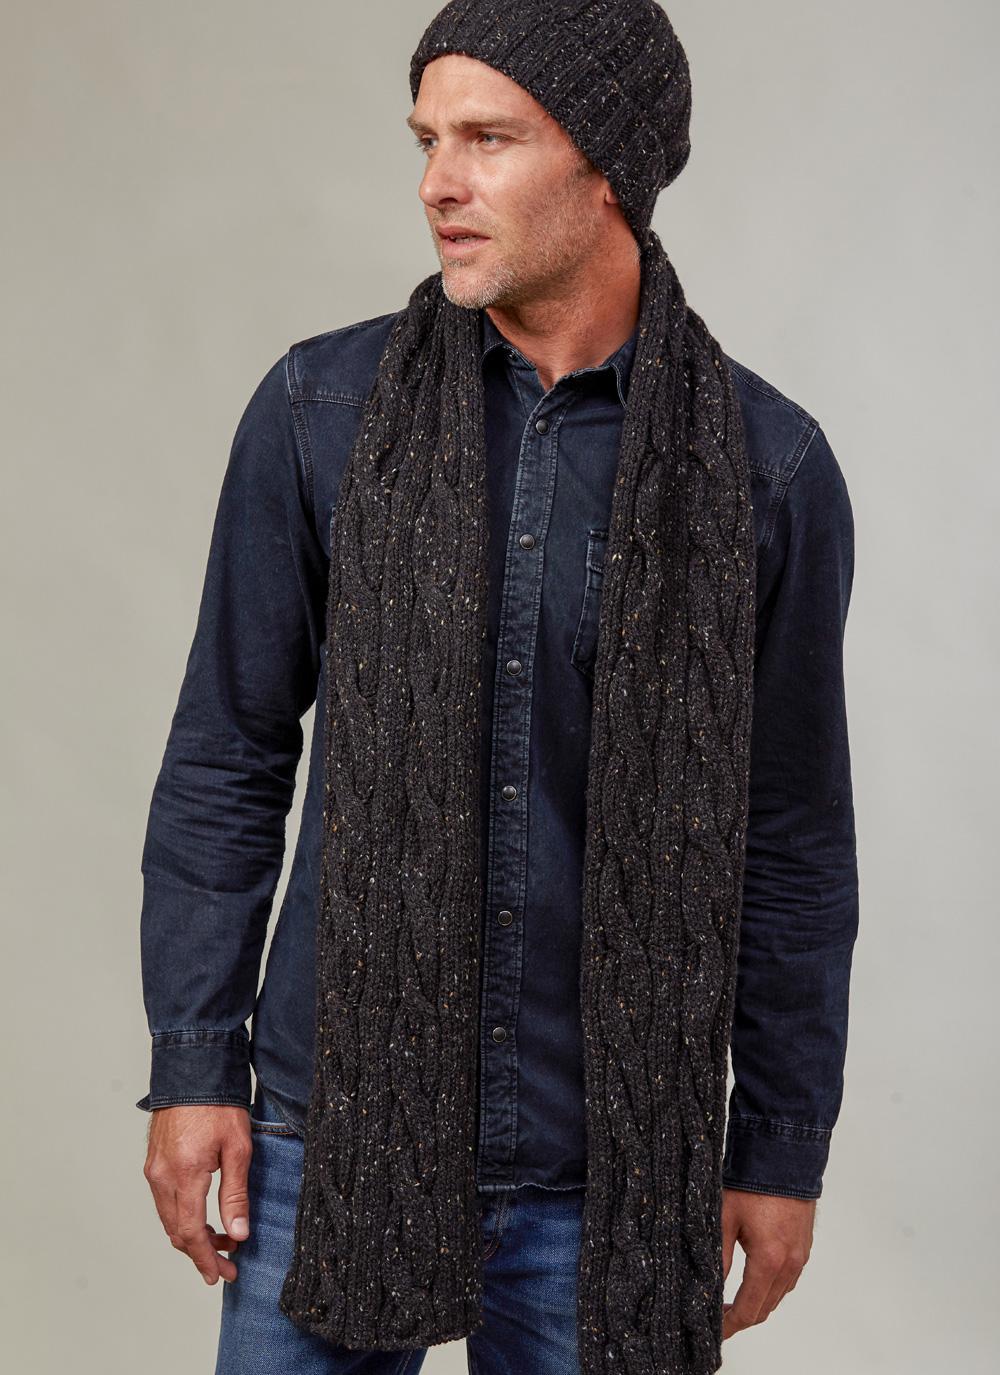 Genuine Knitted 100% Wool Scarf, US Made